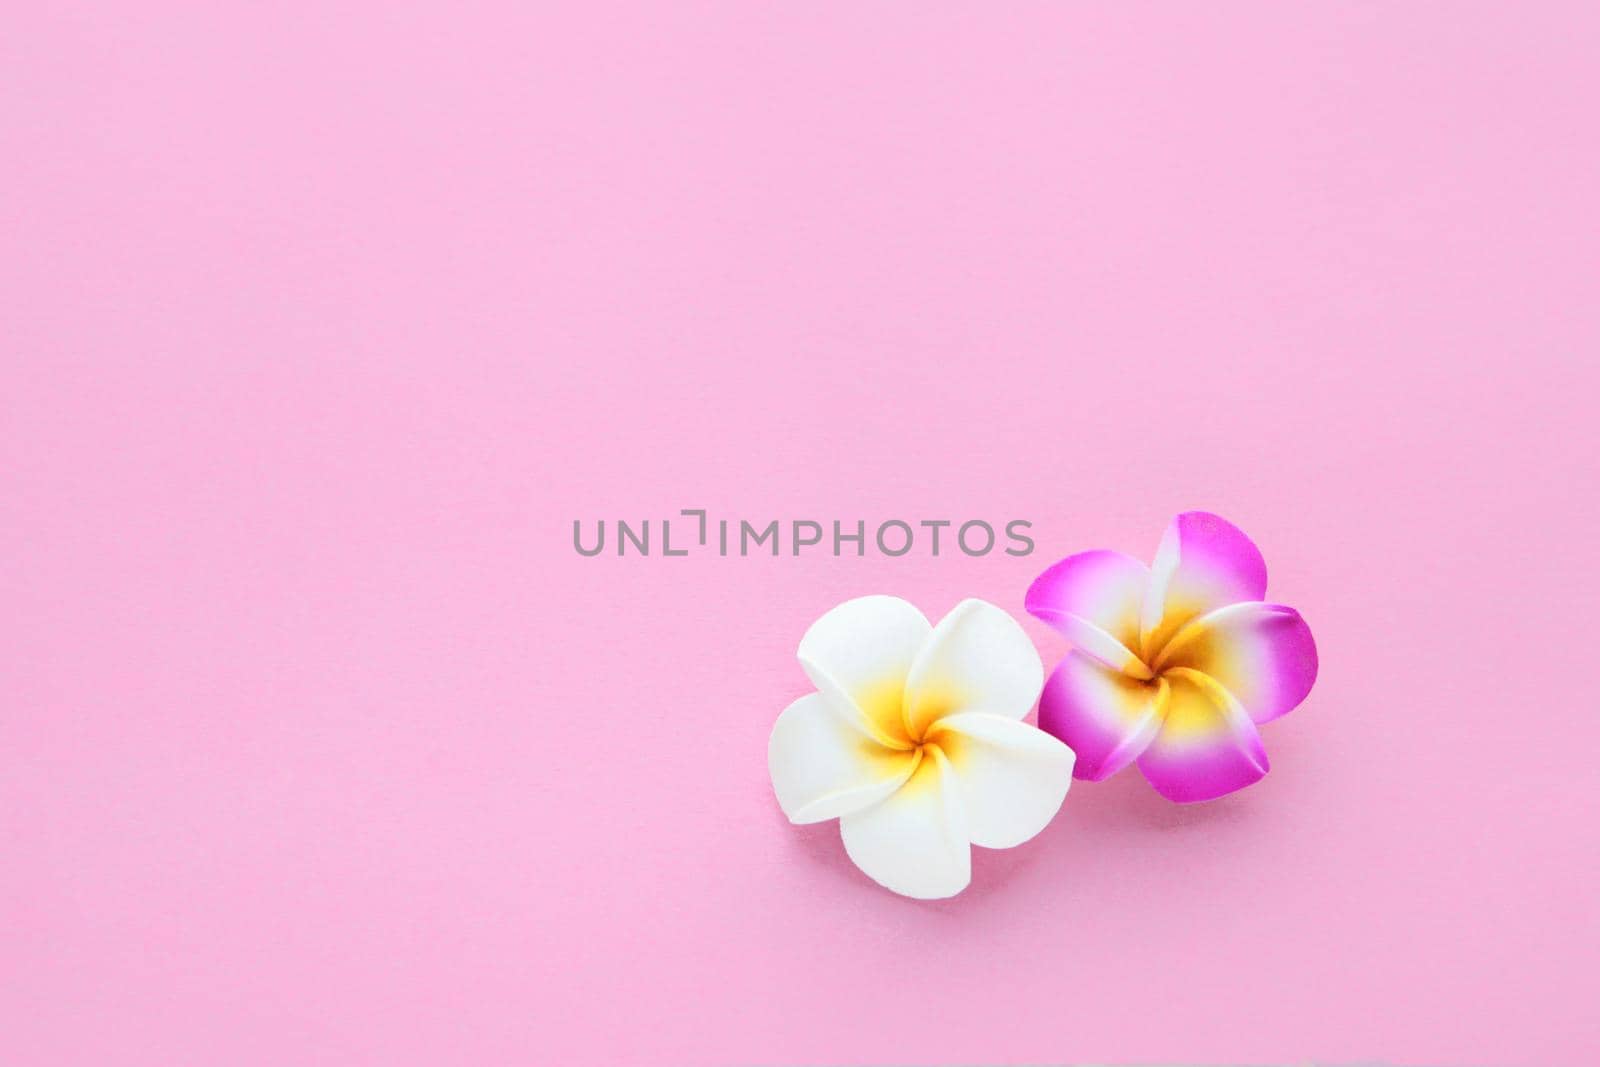 tropical flowers seamless plain background with white and pink frangipani flower, floral texture for wallpaper or backdrop. spring floral concept for decorations with copy space for text